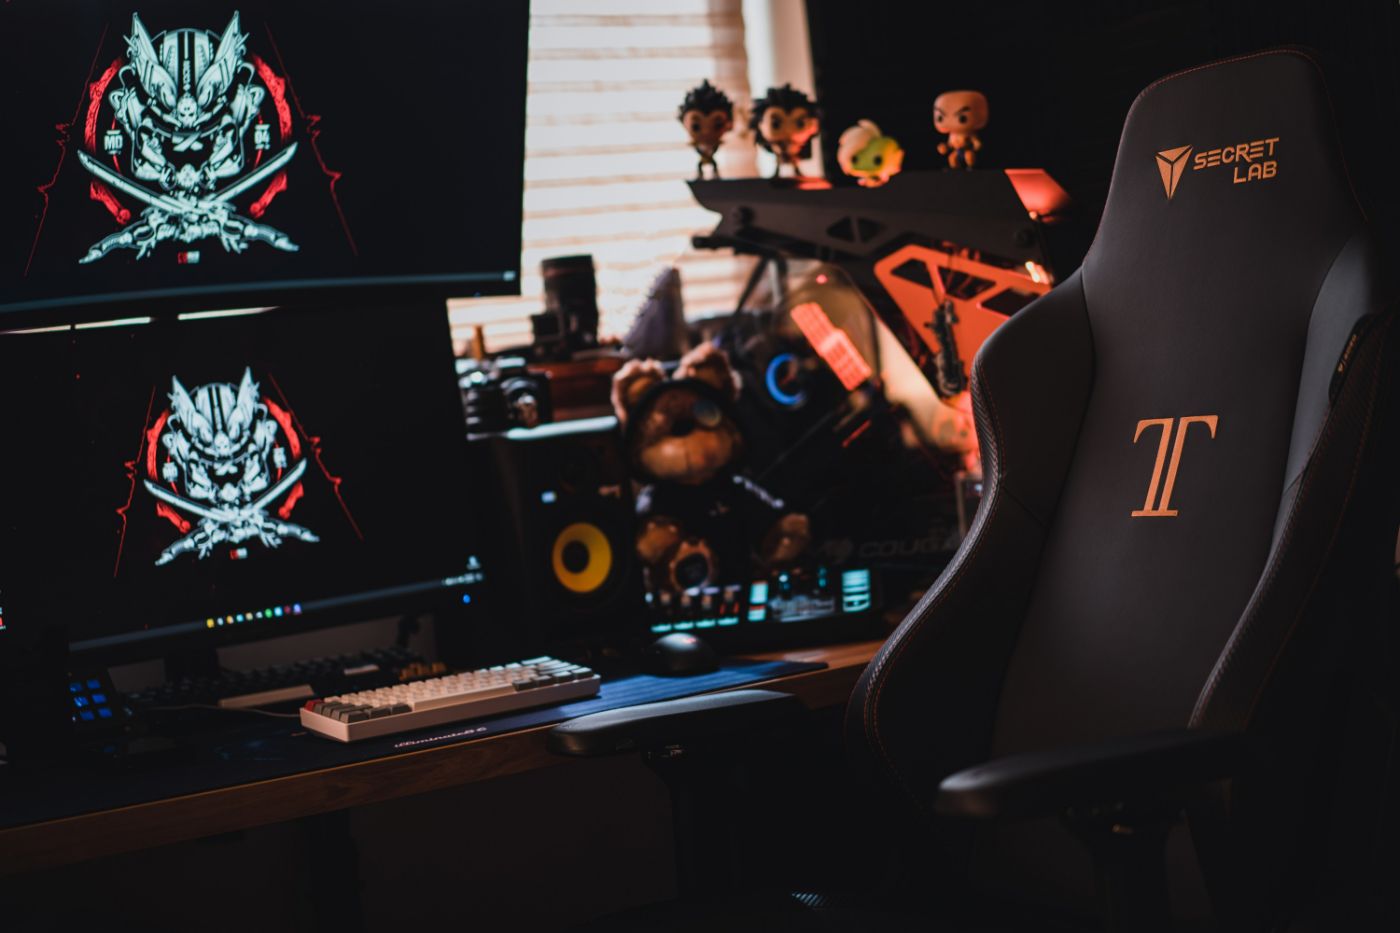 investering Wees tevreden Snoep DXRacer vs. Secretlab: Which Brand Really Stands Out? - SitWorkPlay